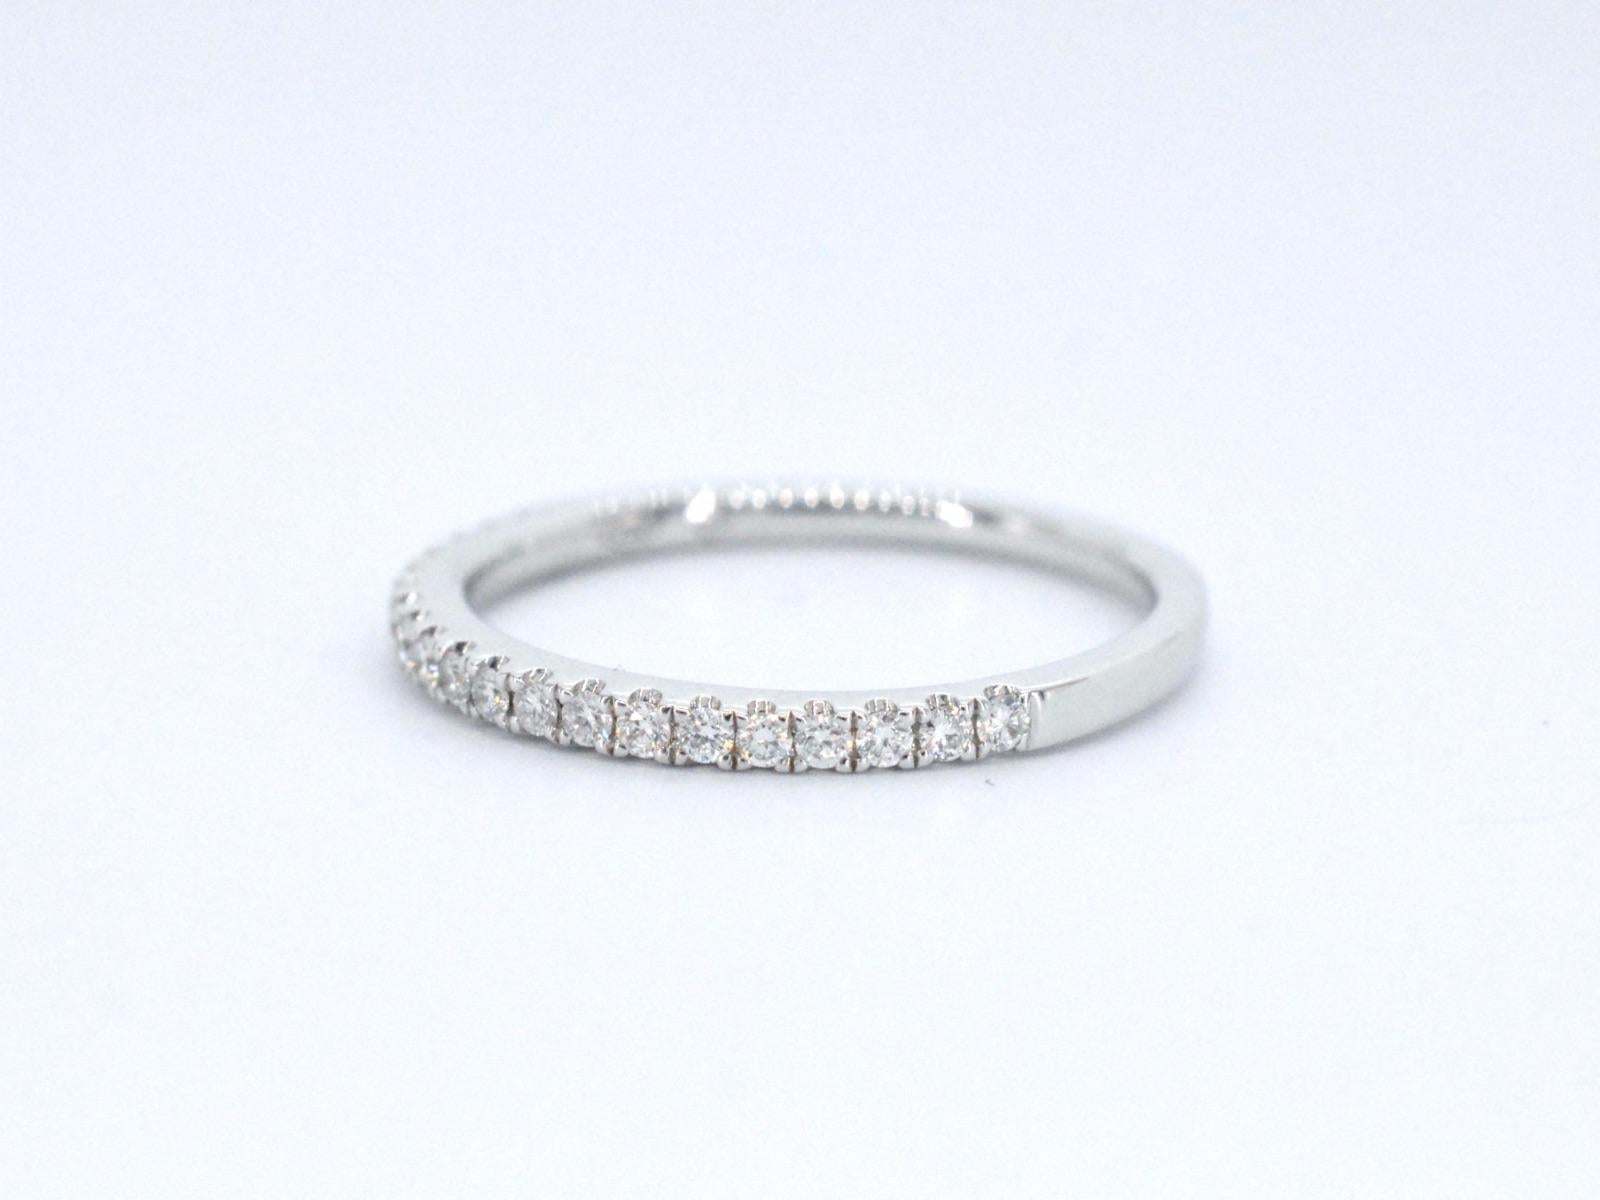 White Gold Ring with Brilliant Cut Diamond For Sale 3